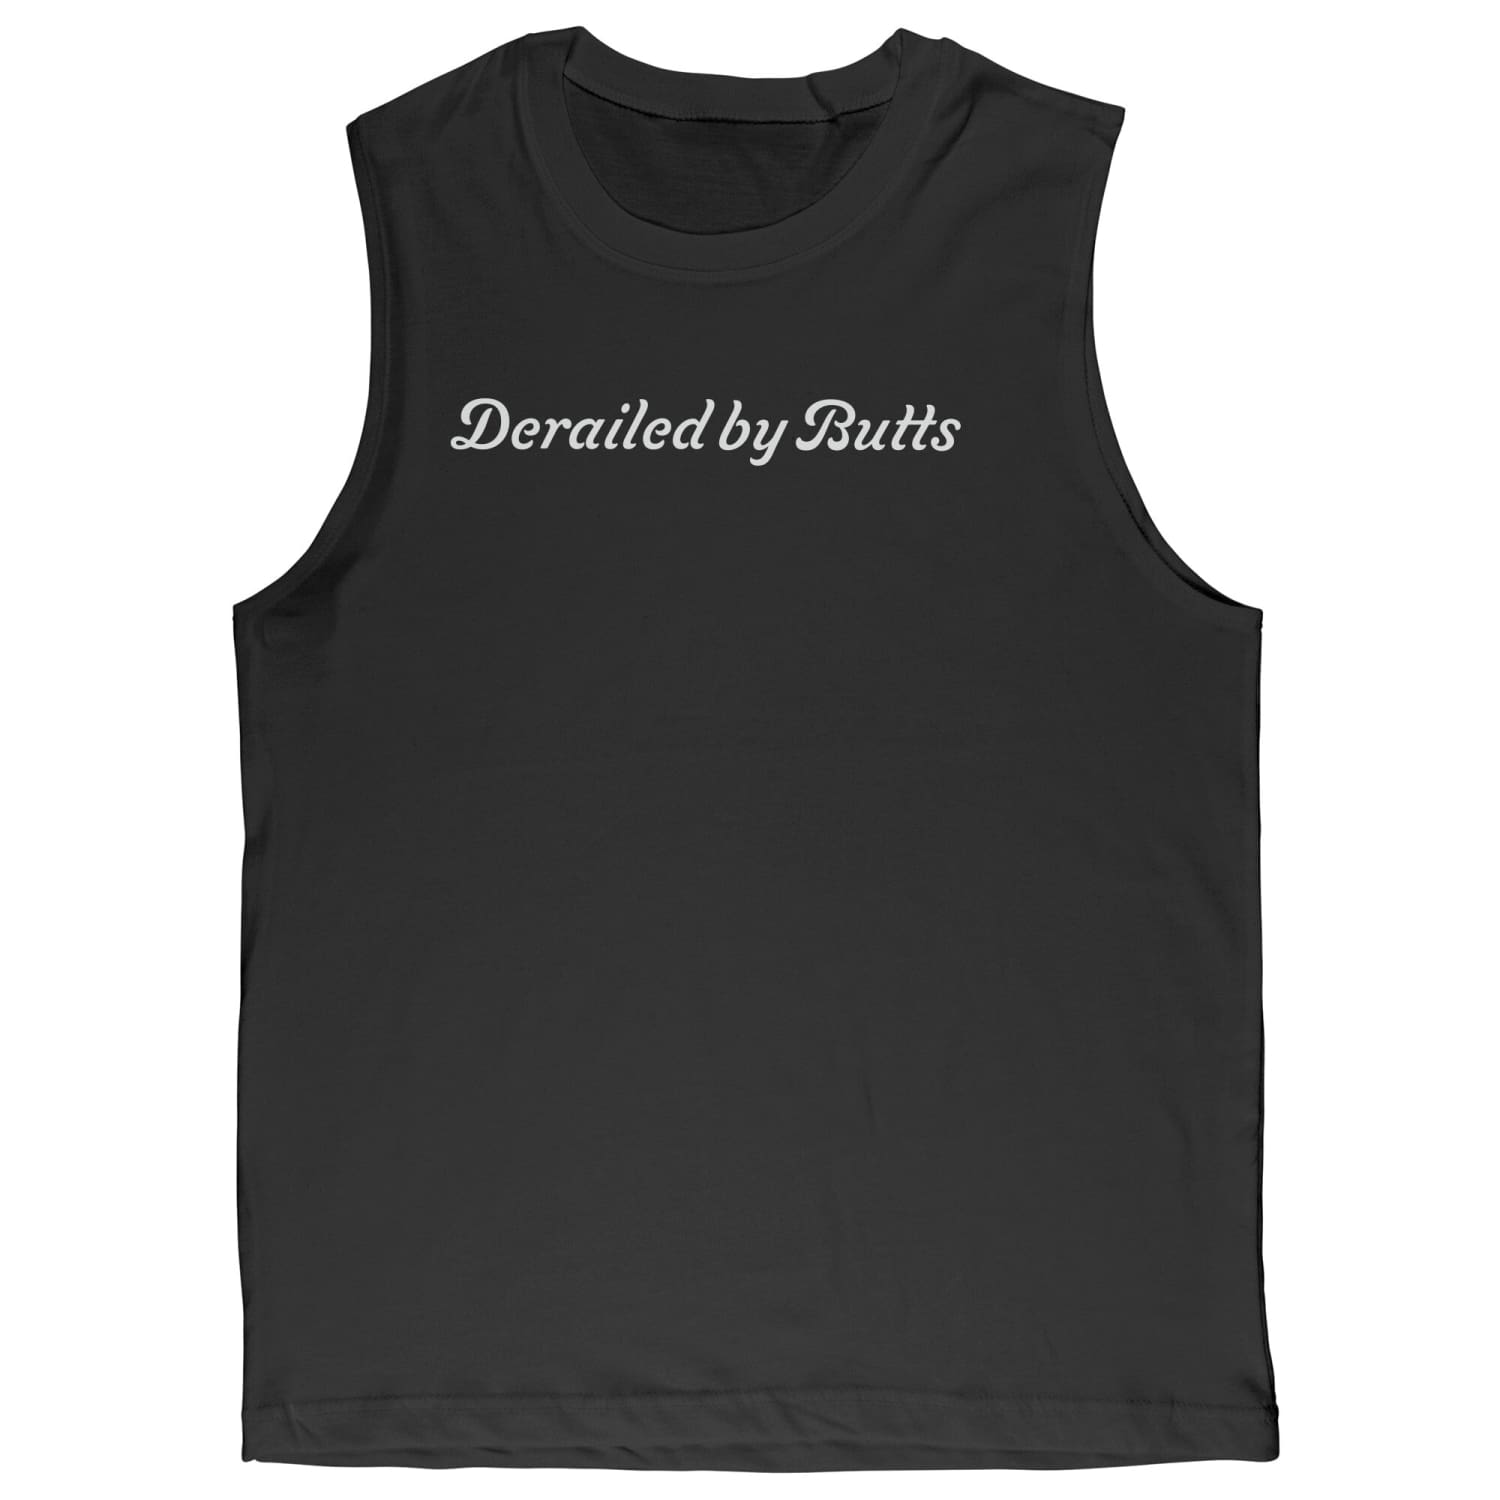 Derailed By Butts Sleeveless Muscle Tee - Black / S - Apparel